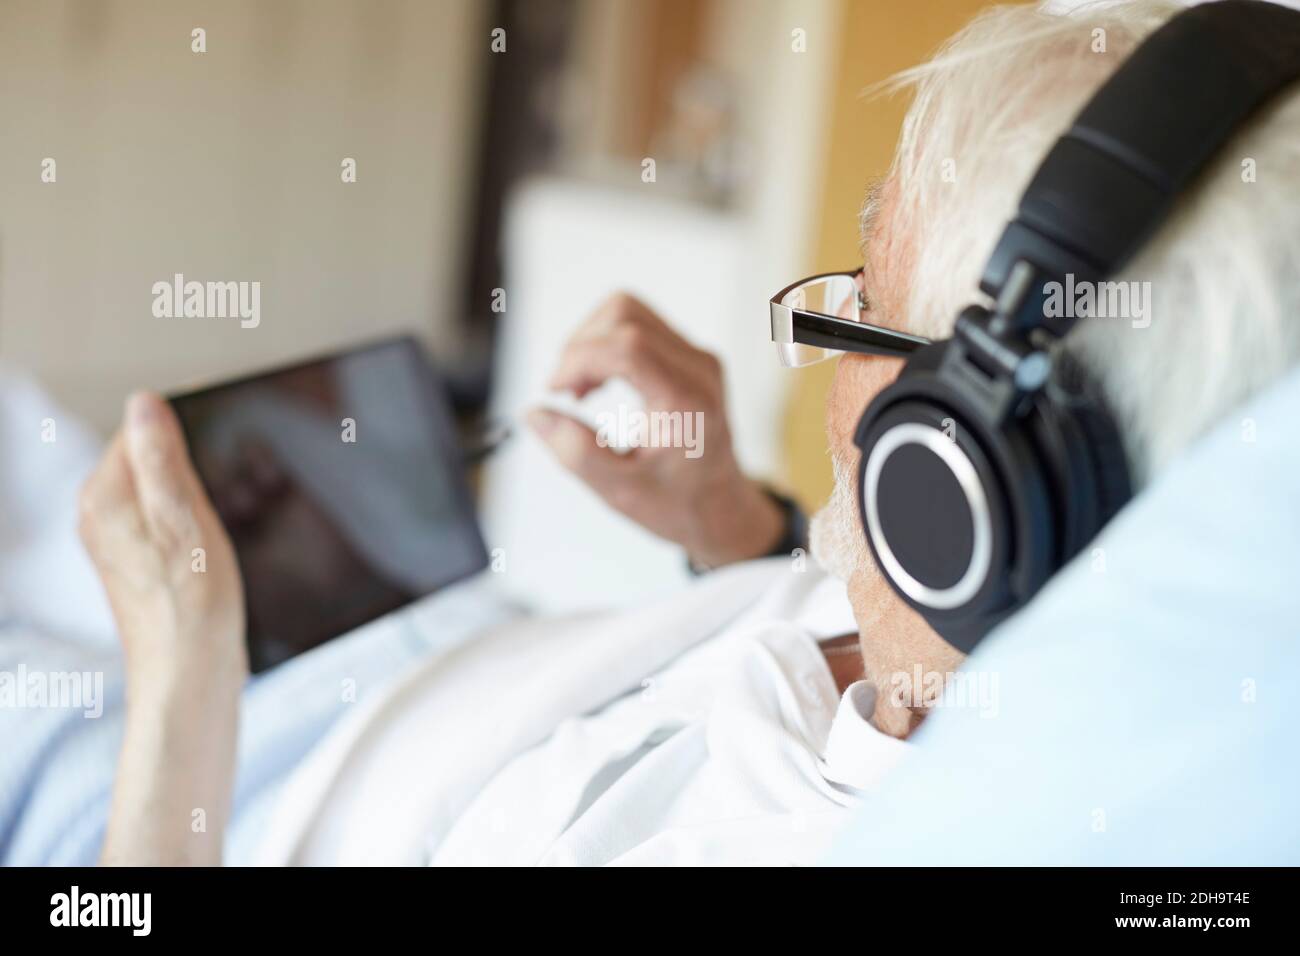 Over the shoulder view of senior man wearing headphones while using digital tablet in hospital Stock Photo